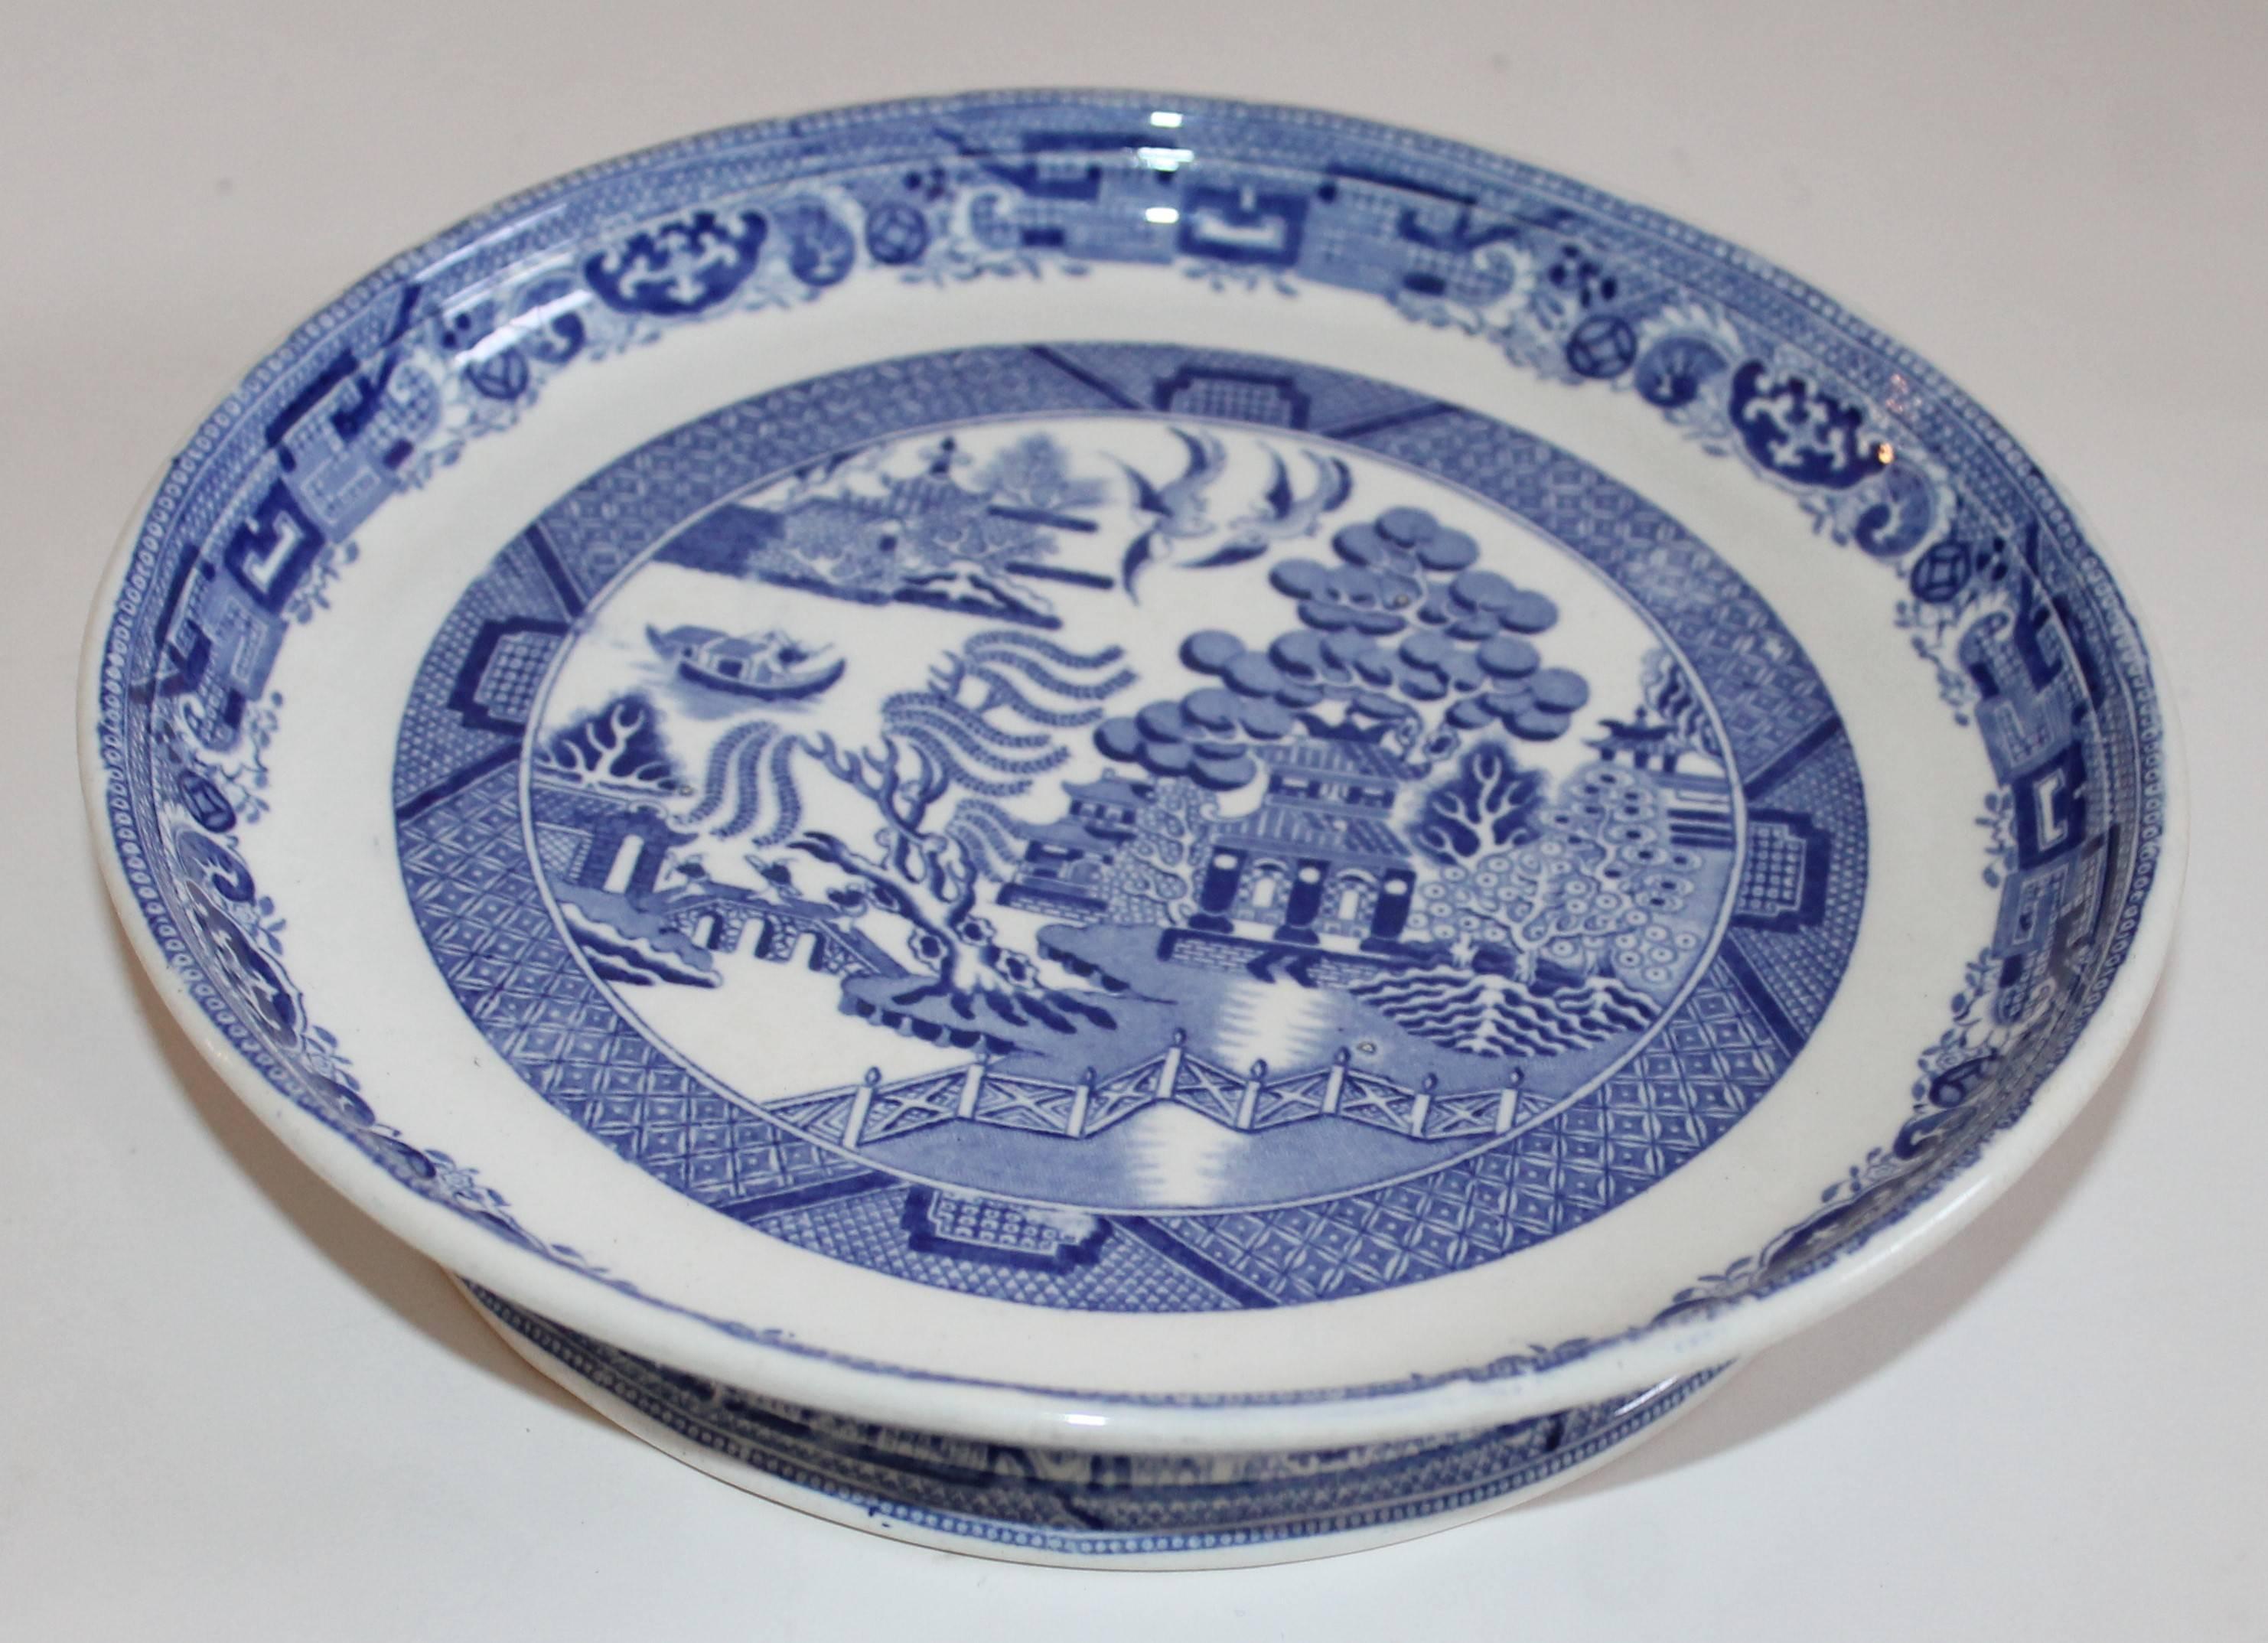 19th century blue willow cake platter. This great blue willow cake platter is in amazing condition. The stand is white and features the classic Blue Willow pattern. The pedestal of the stand also features blue detailing around the base.